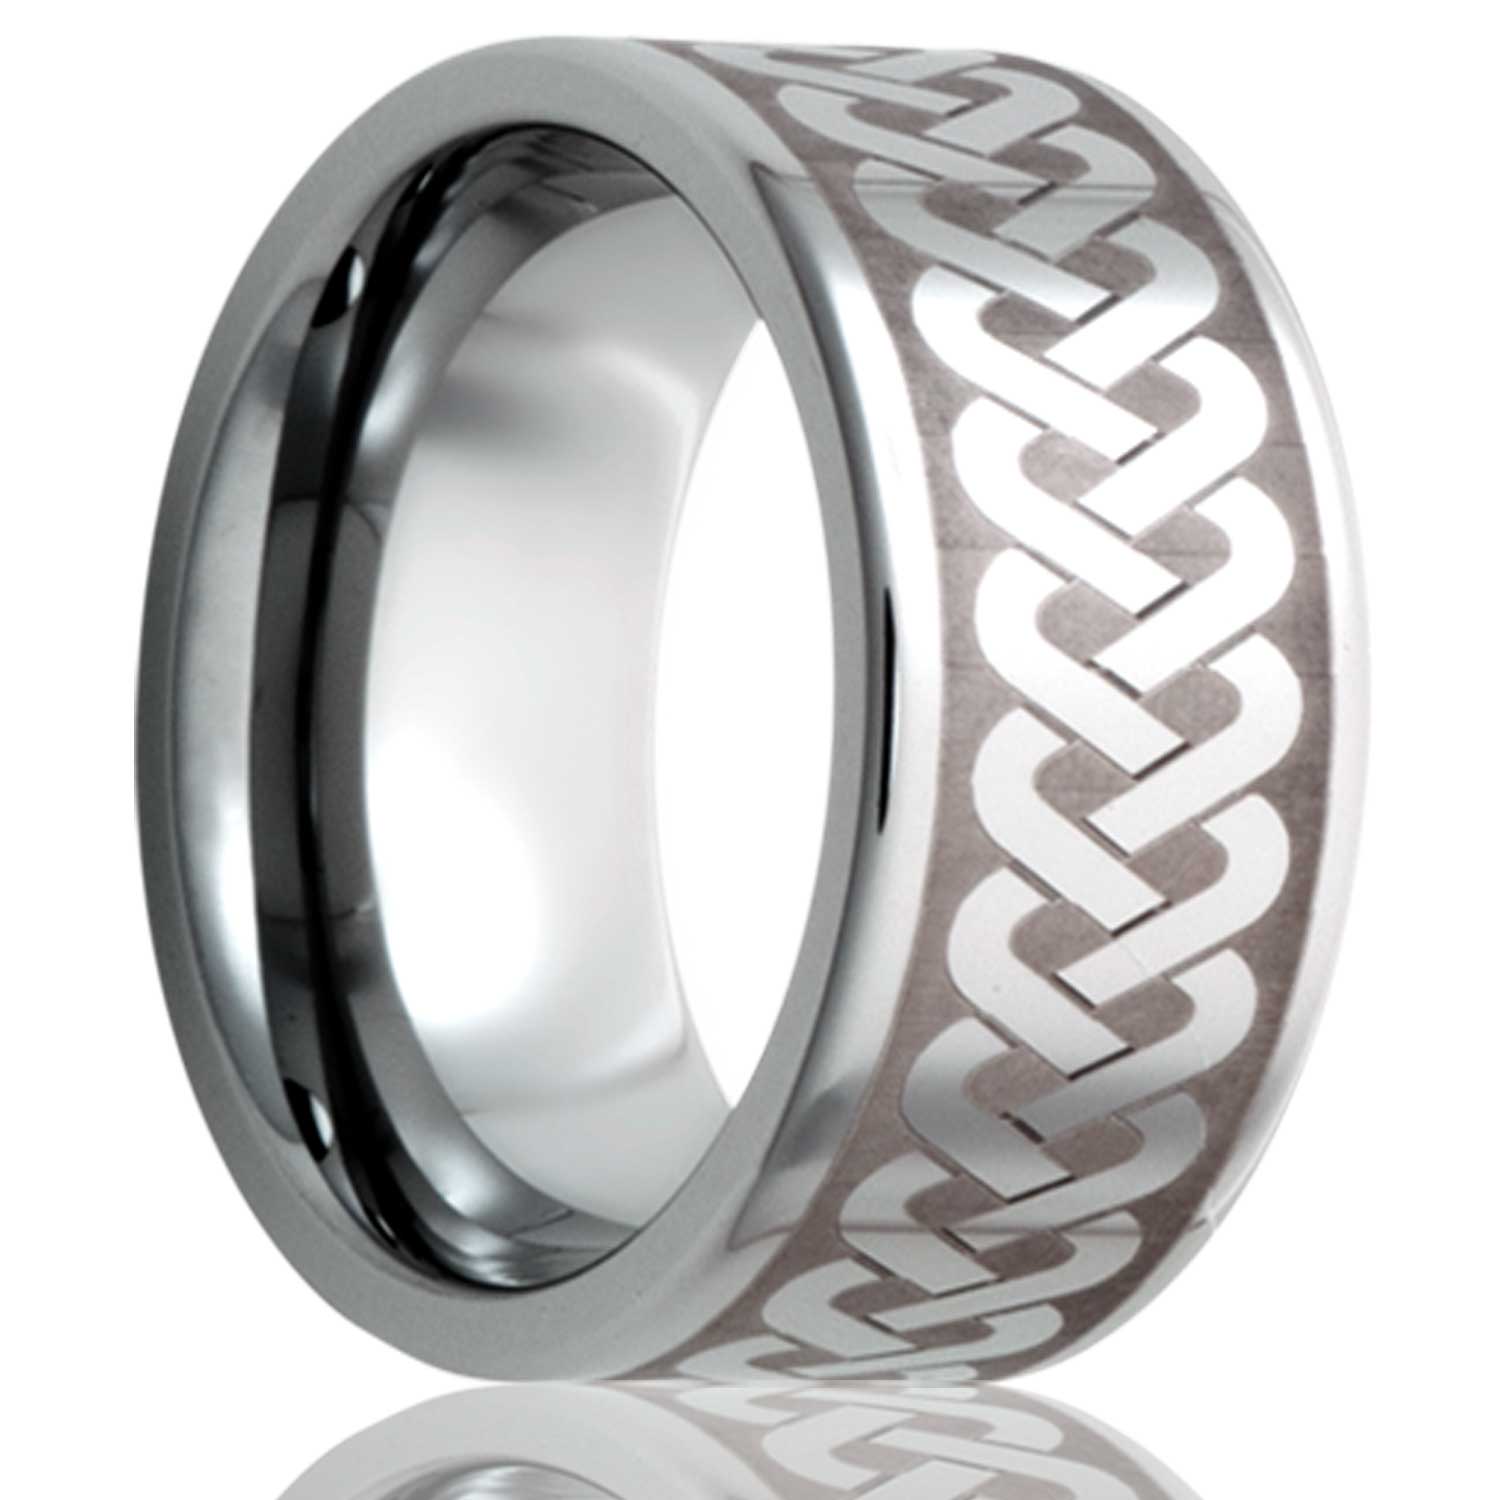 A sailor's celtic knot cobalt wedding band displayed on a neutral white background.